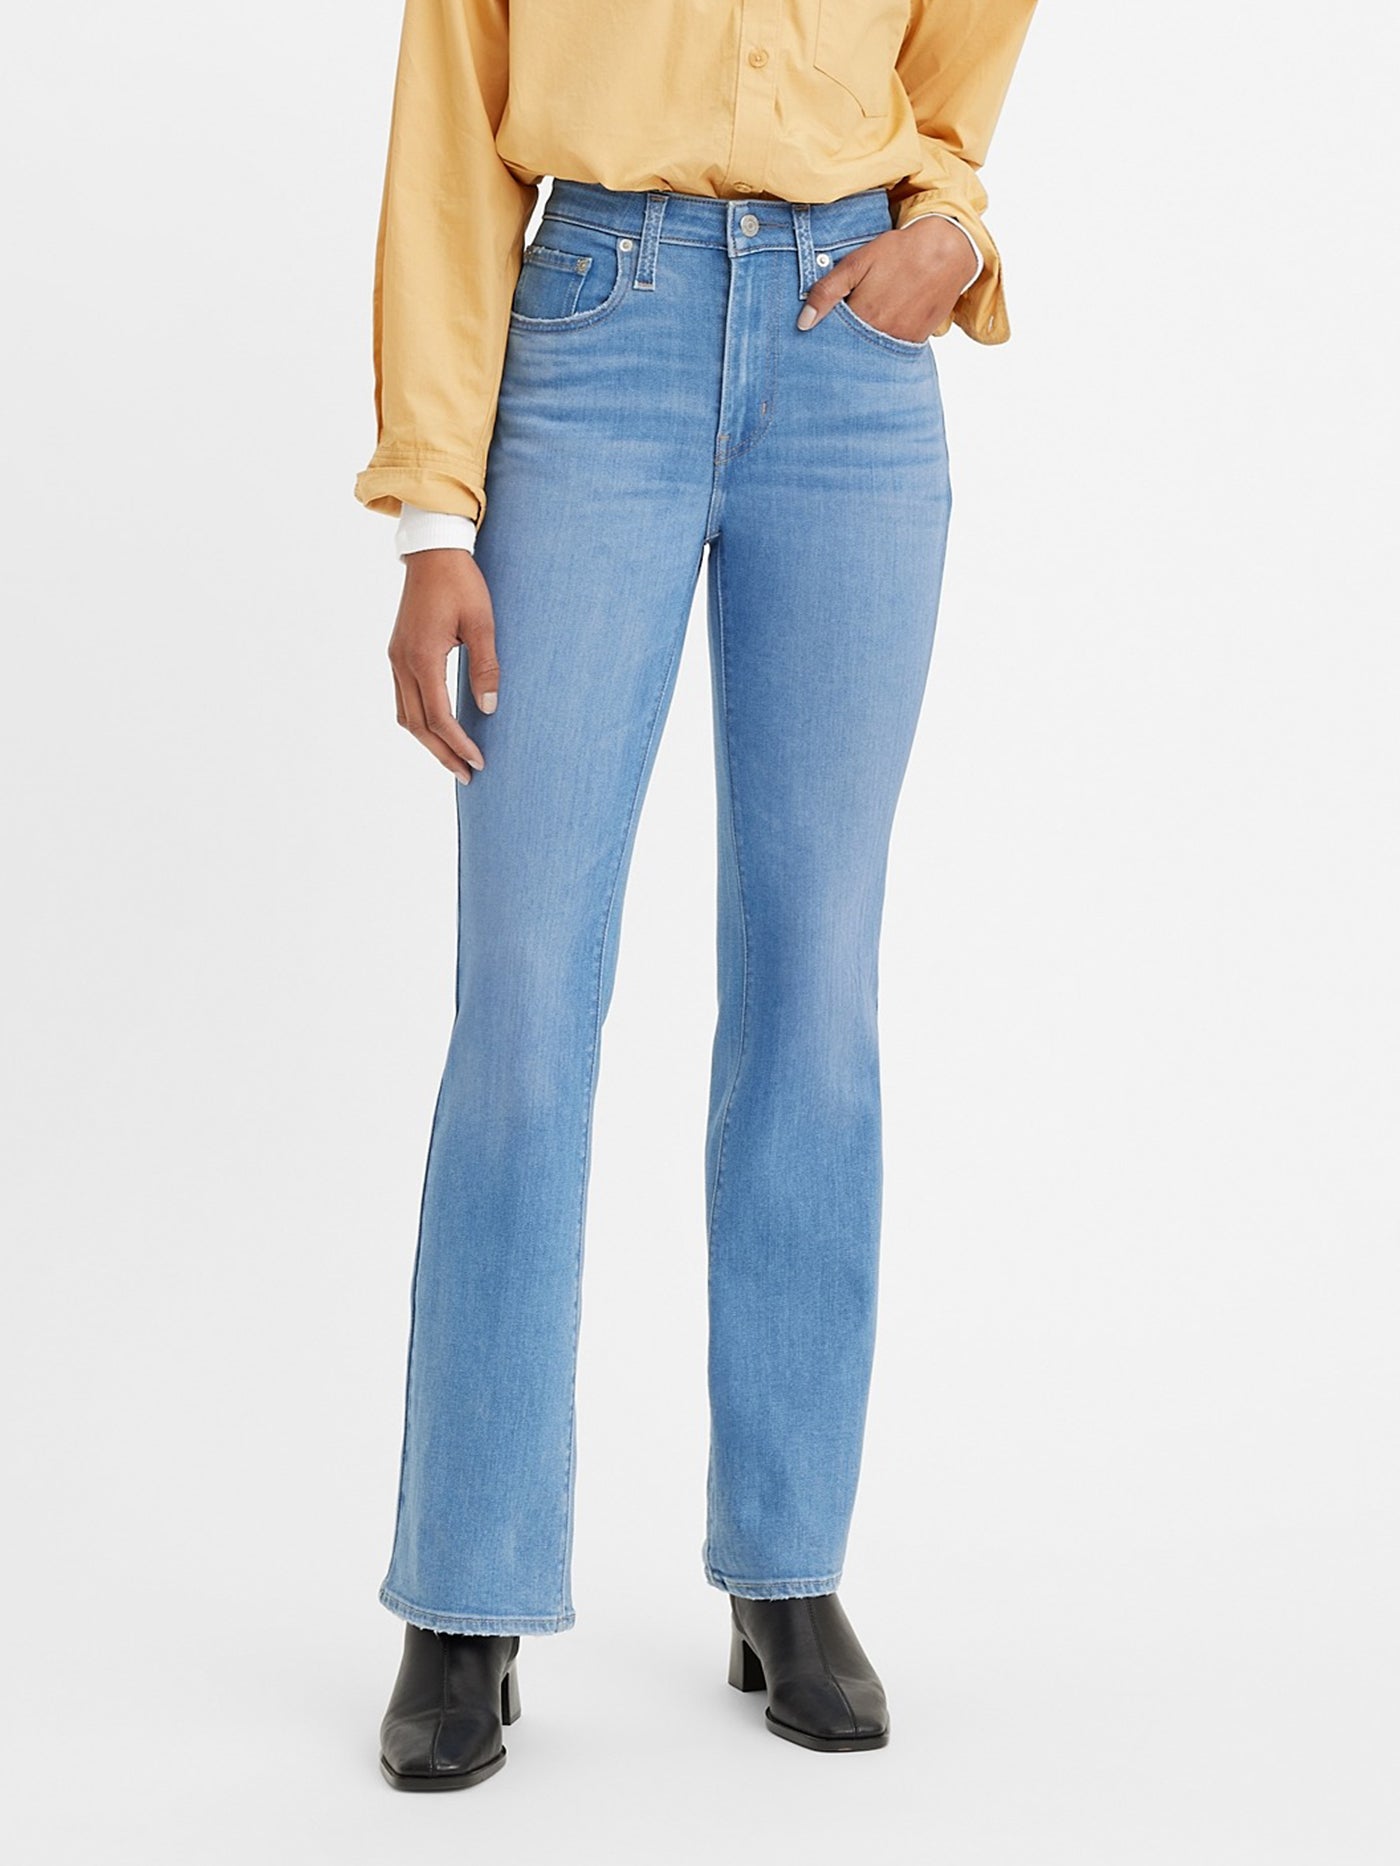 Buy Levi's Women's 725 High Rise Bootcut Jeans, Lapis Speed